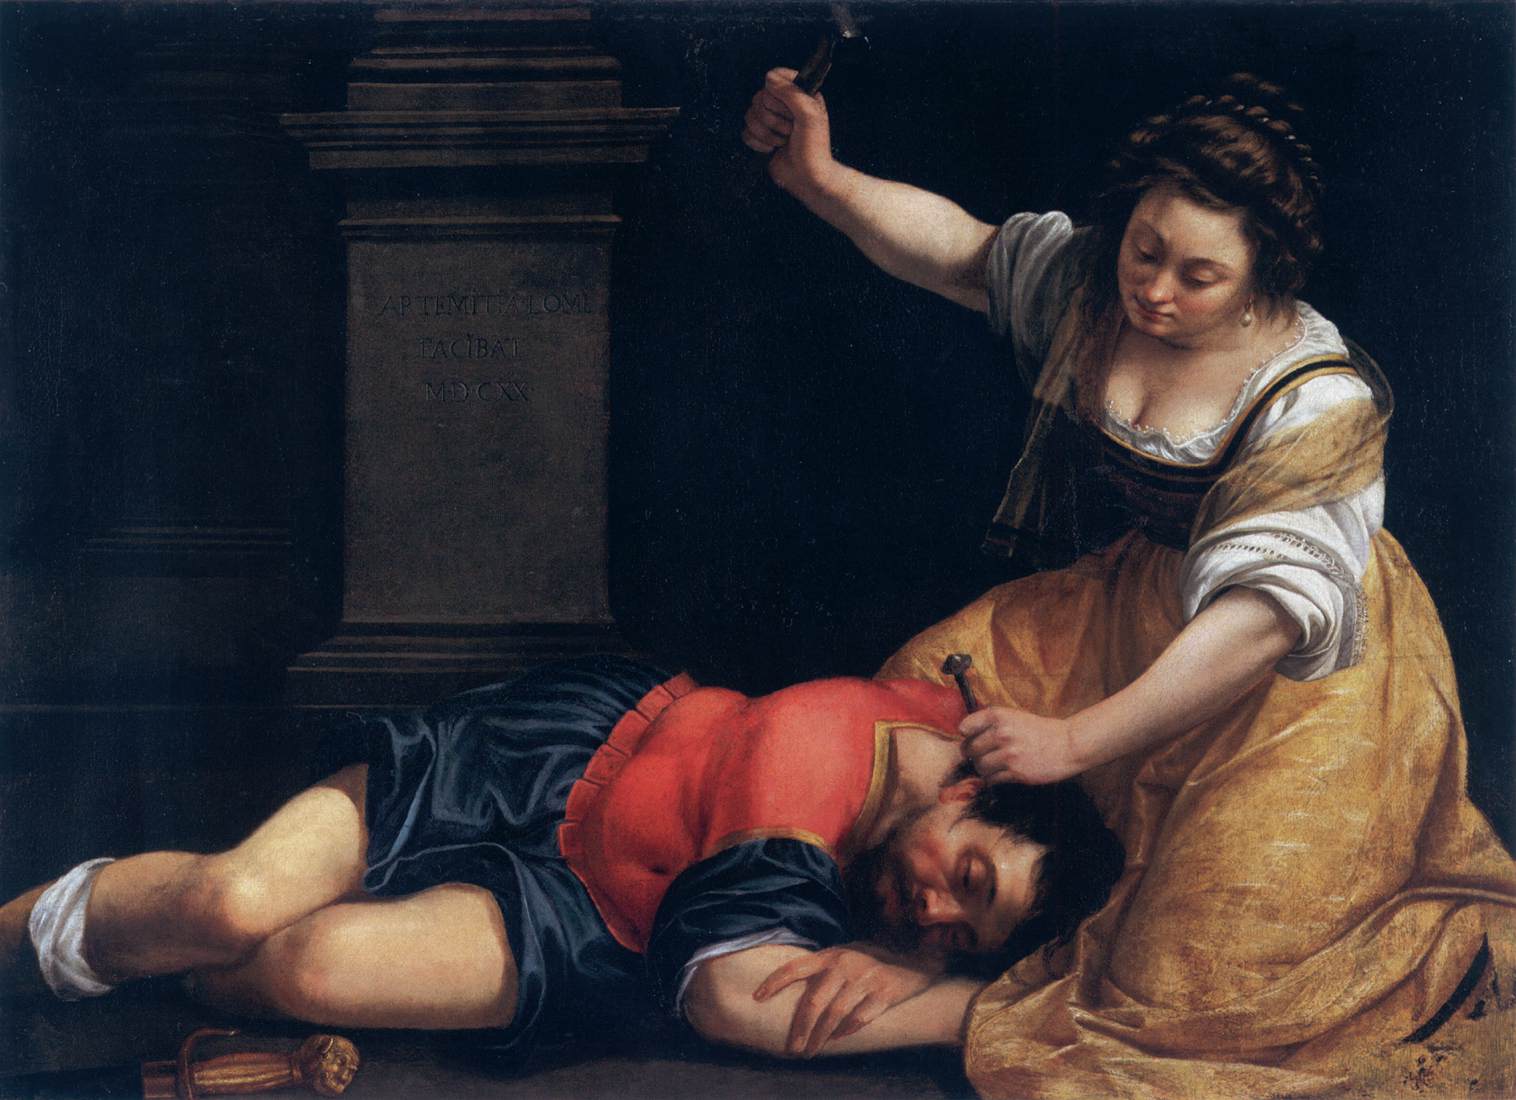 A man lays sleeping on his side, his head rests in his arms. A young woman kneels over him, with a tent peg held to his temple with her left hand. In her right arm, she holds a hammer up high, poised to smash onto the peg and into his skull, killing him. They are dressed in classical costumes and an inscription on the column in the background identifies the artist. The woman seems unaware of the viewer and seems calm, at peace with the violence that is to follow.